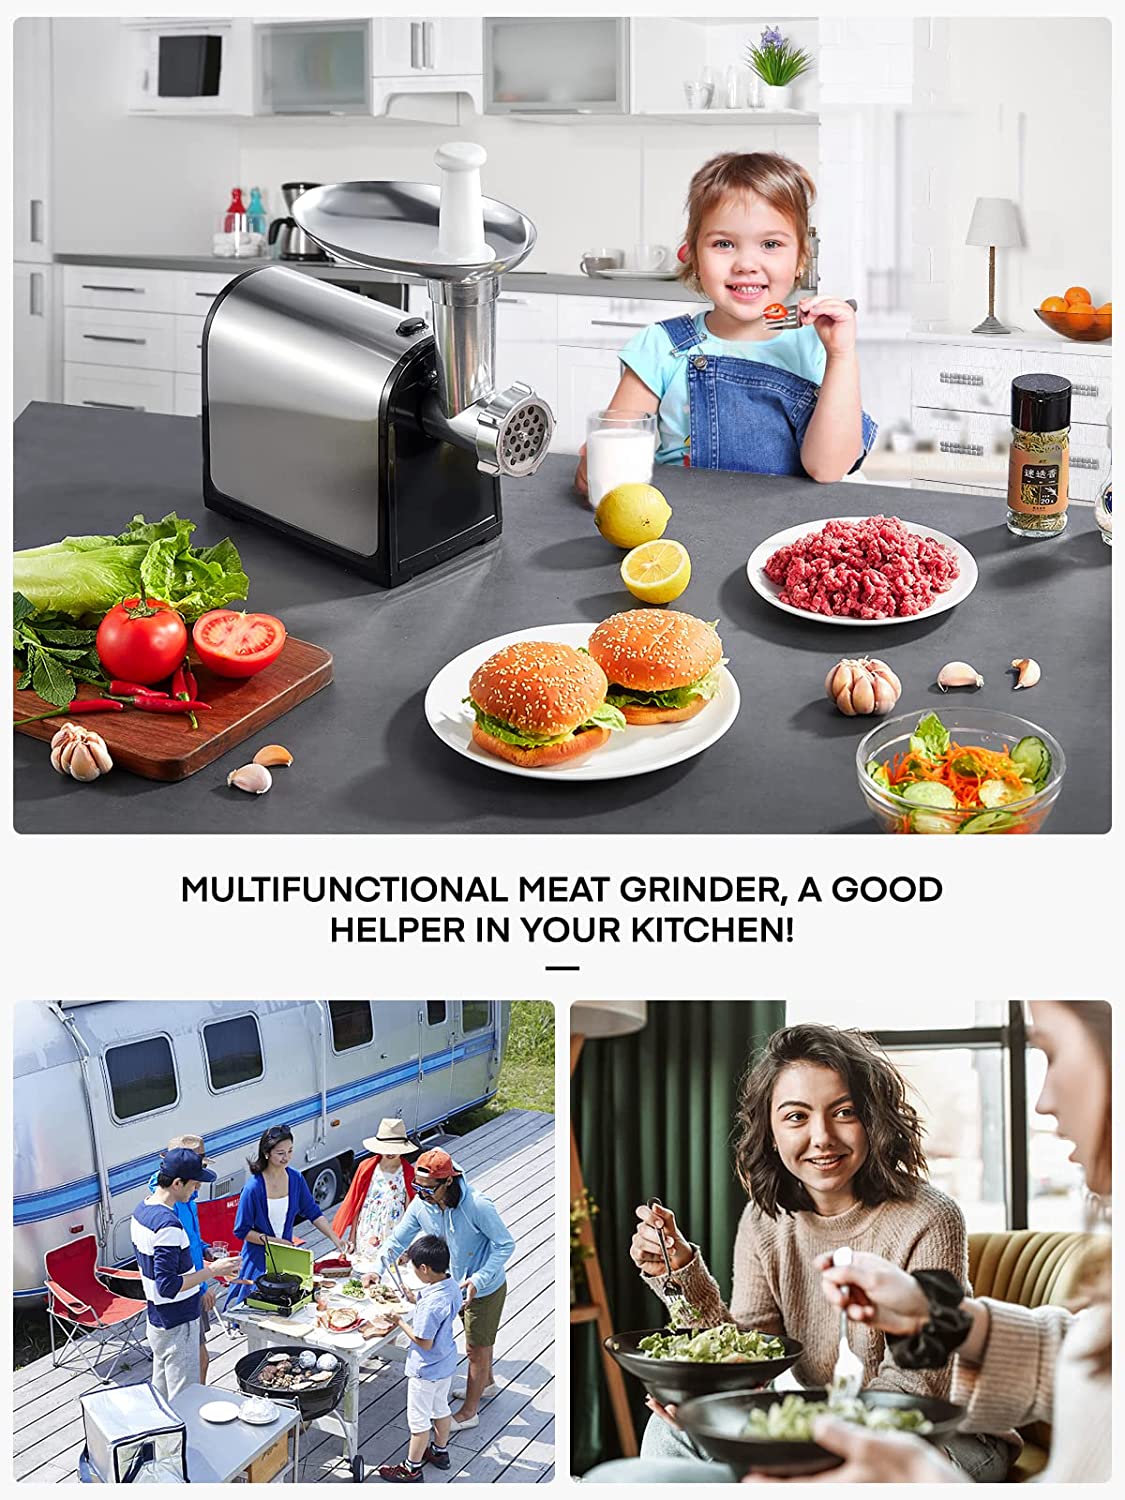 multifunctional meat grinder, a good helper in your kitchen, Meat Grinder Electric, Stainless Steel, HOUSNAT 2000W Max Heavy Duty Meat Mincer Machine with 2 Blades, 3 Plates, 3 in 1 Food Grinder, Sausage Stuffer Tube & Kubbe Kit for Home Kitchen Use